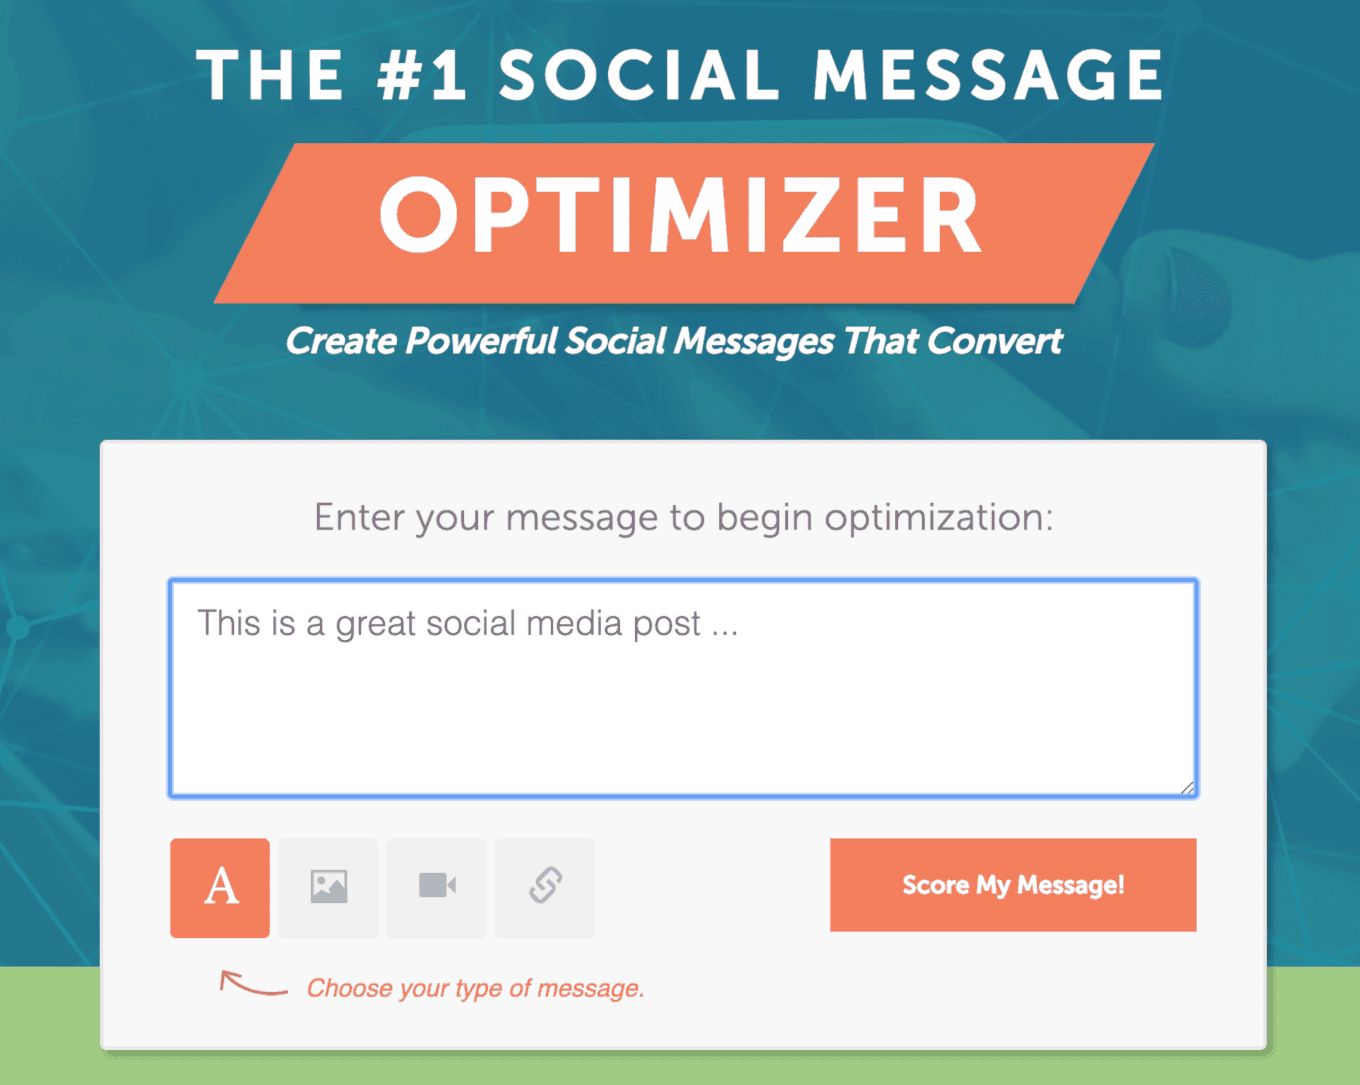 Getting started with the social message optimizer